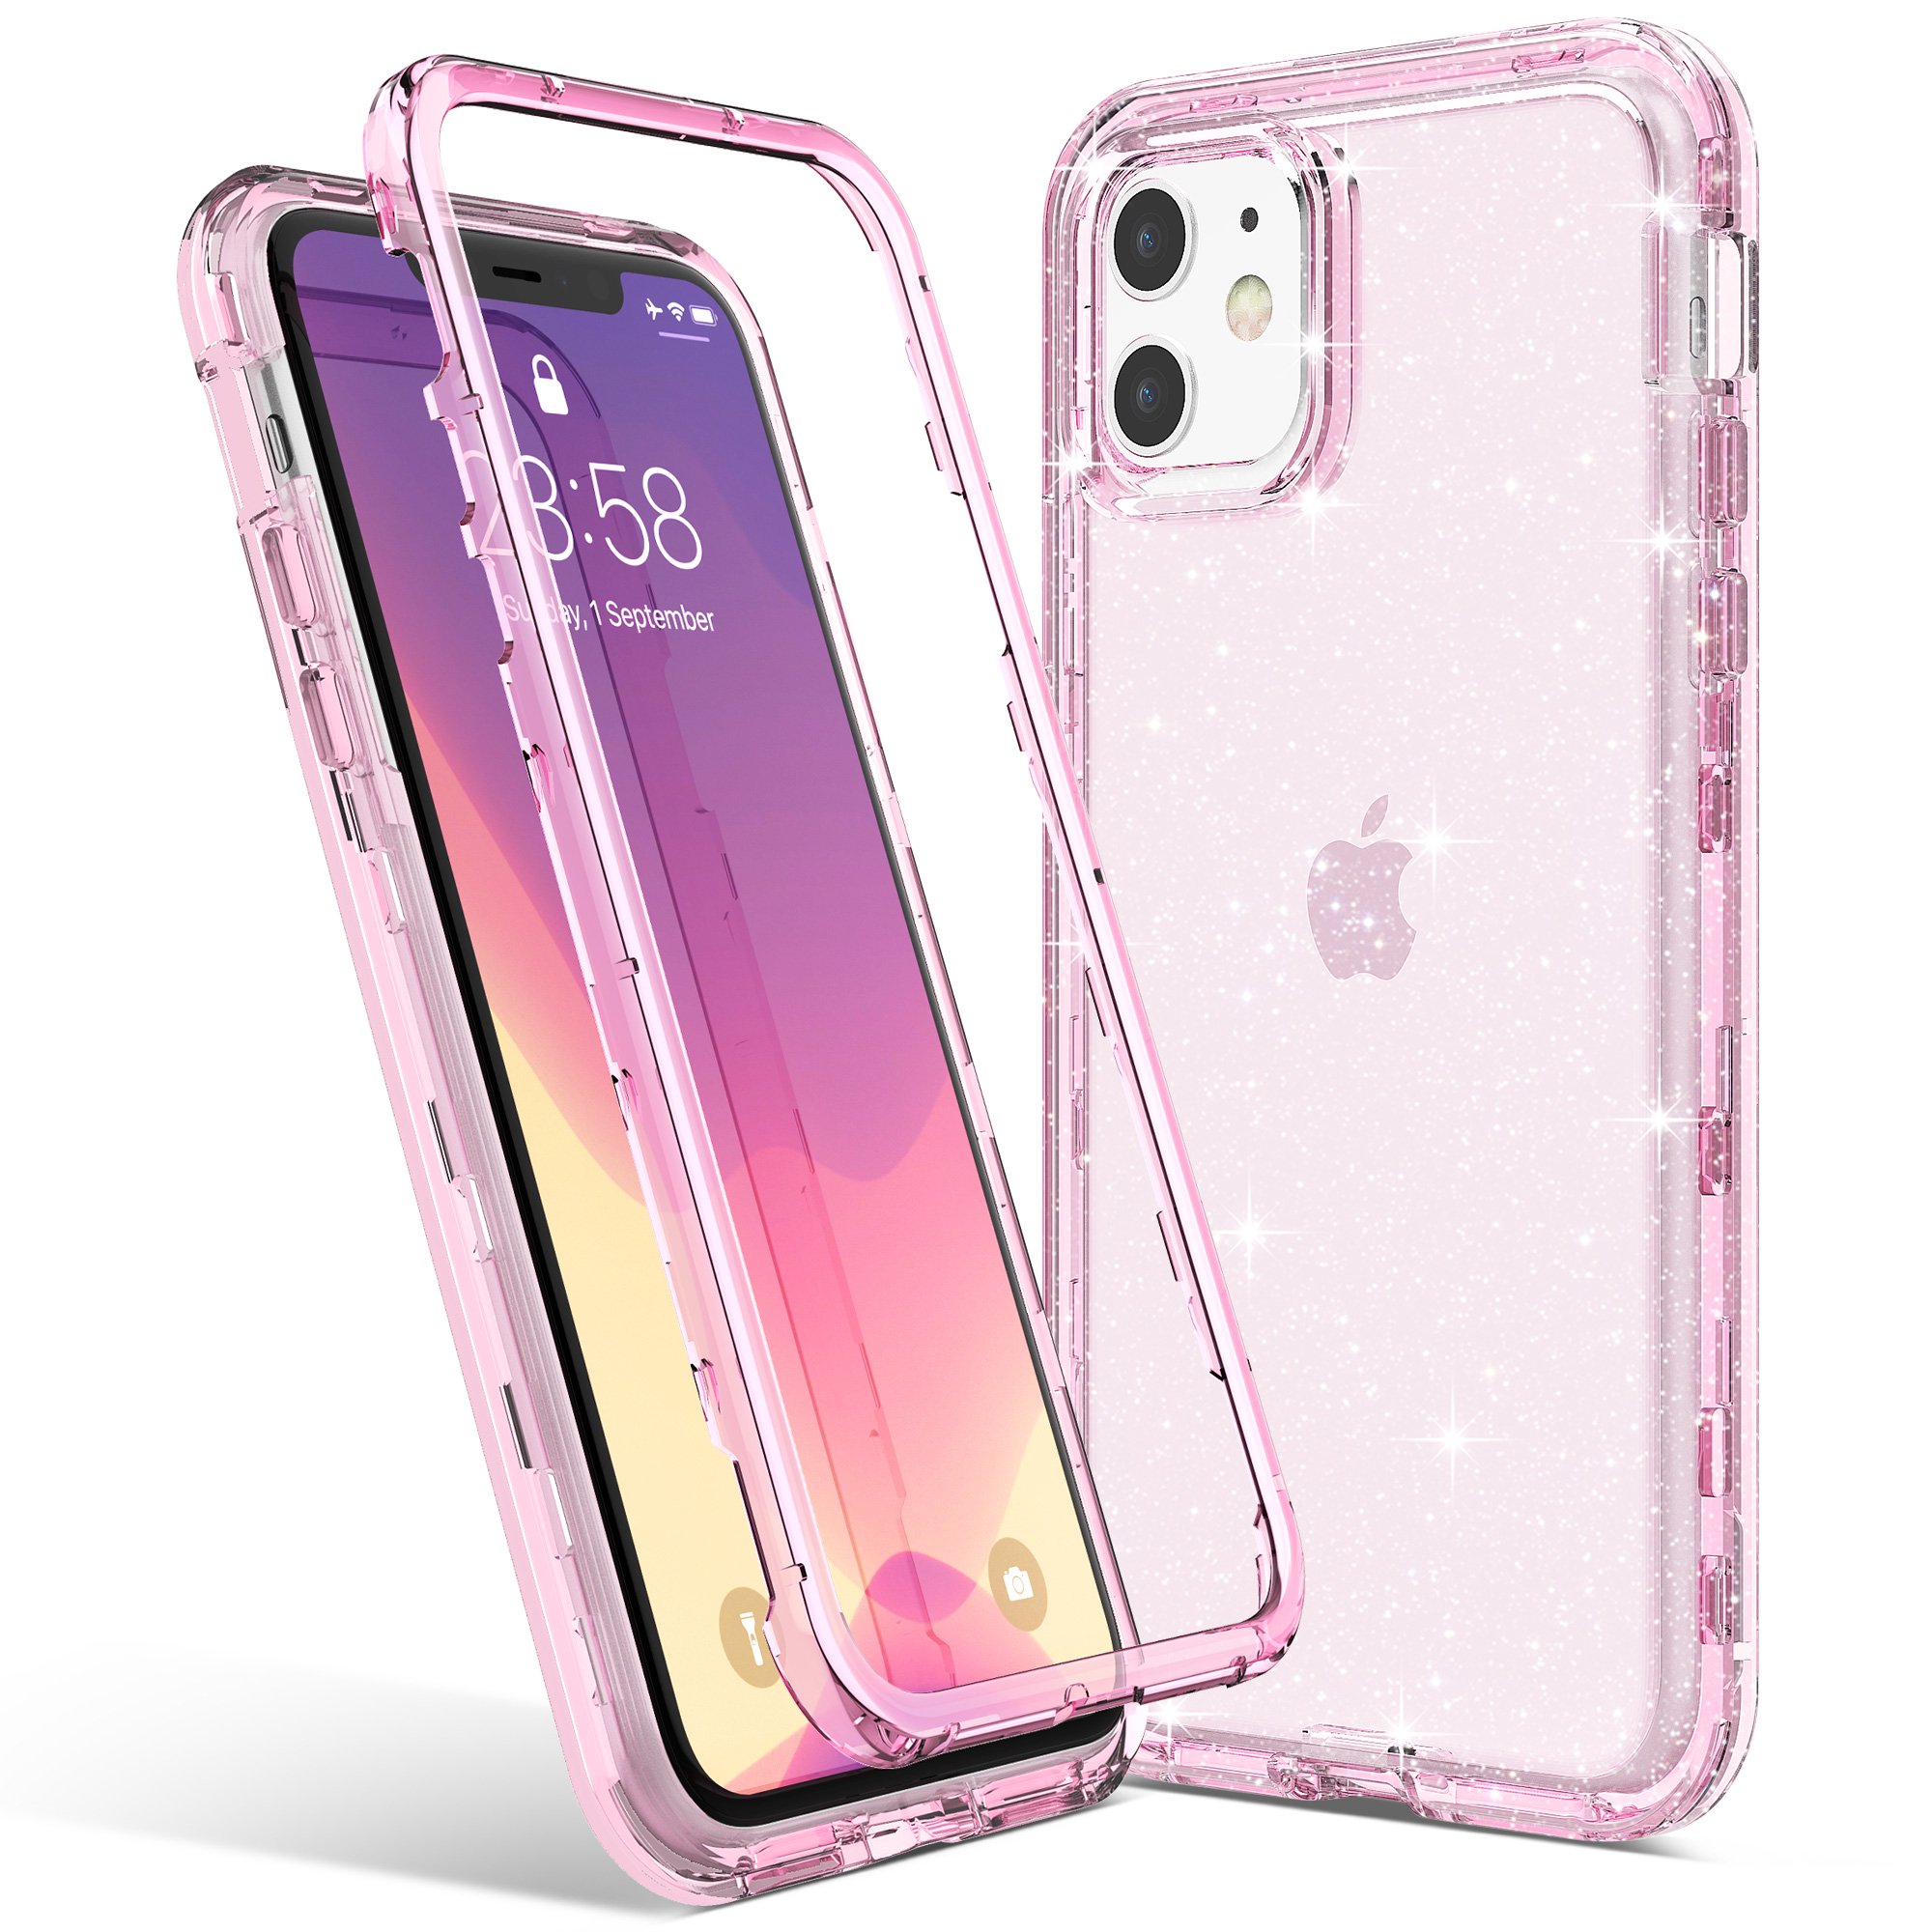 iPhone 11 Case, Heavy Duty Shockproof Rugged Protection TPU Bumper Phone Case for Apple iPhone 11 6.1 inch, Pink Clear Glitter